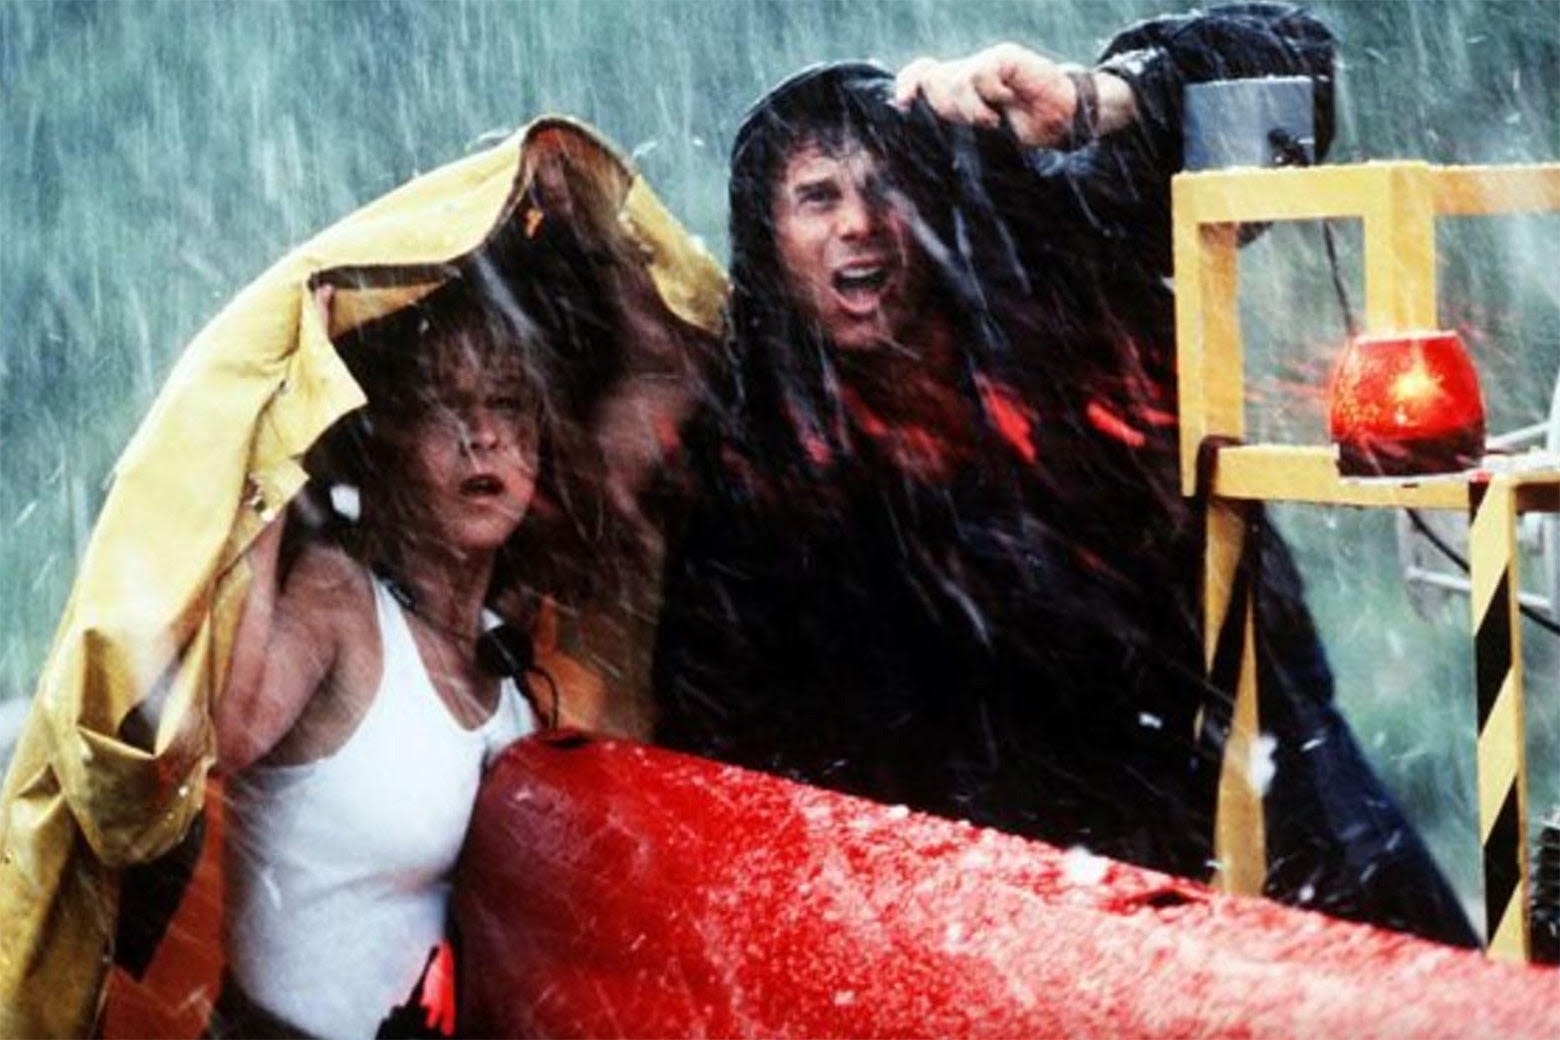 Twister Almost Ruined Storm Chasing Back in the 1990s. The Sequel Has Hobbyists Battening Down the Hatches.